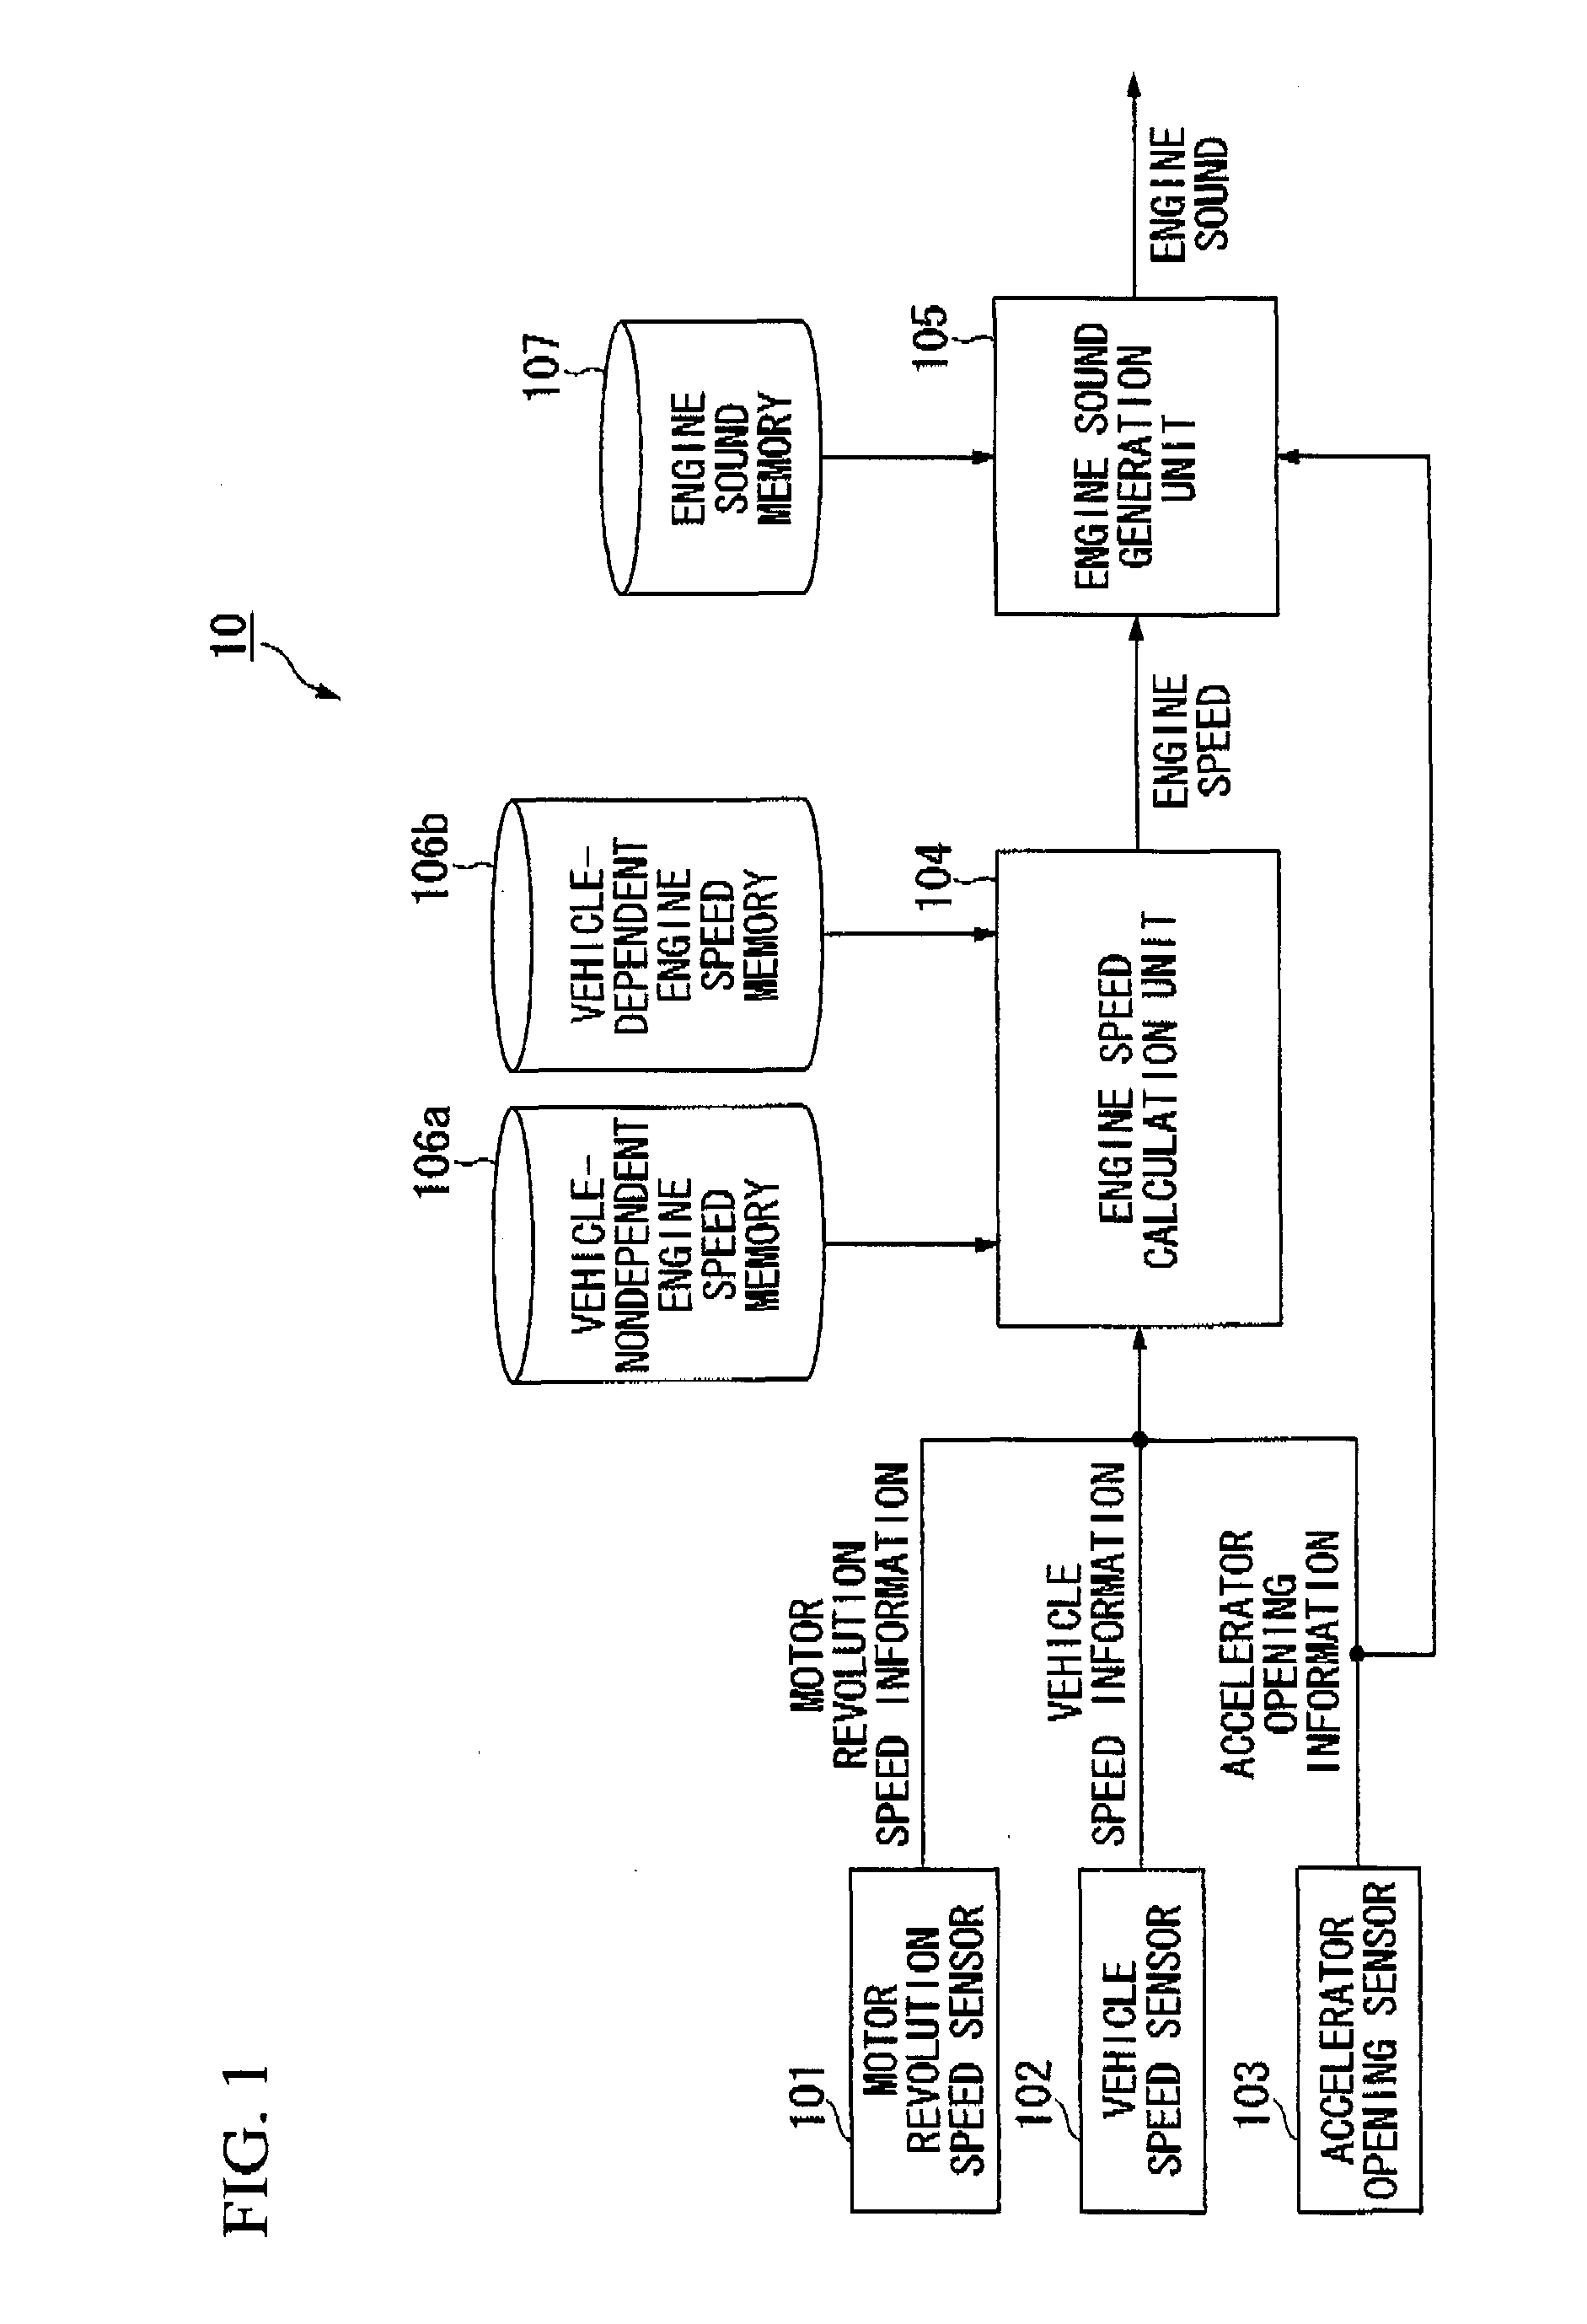 Engine speed calculation device and engine sound generation device